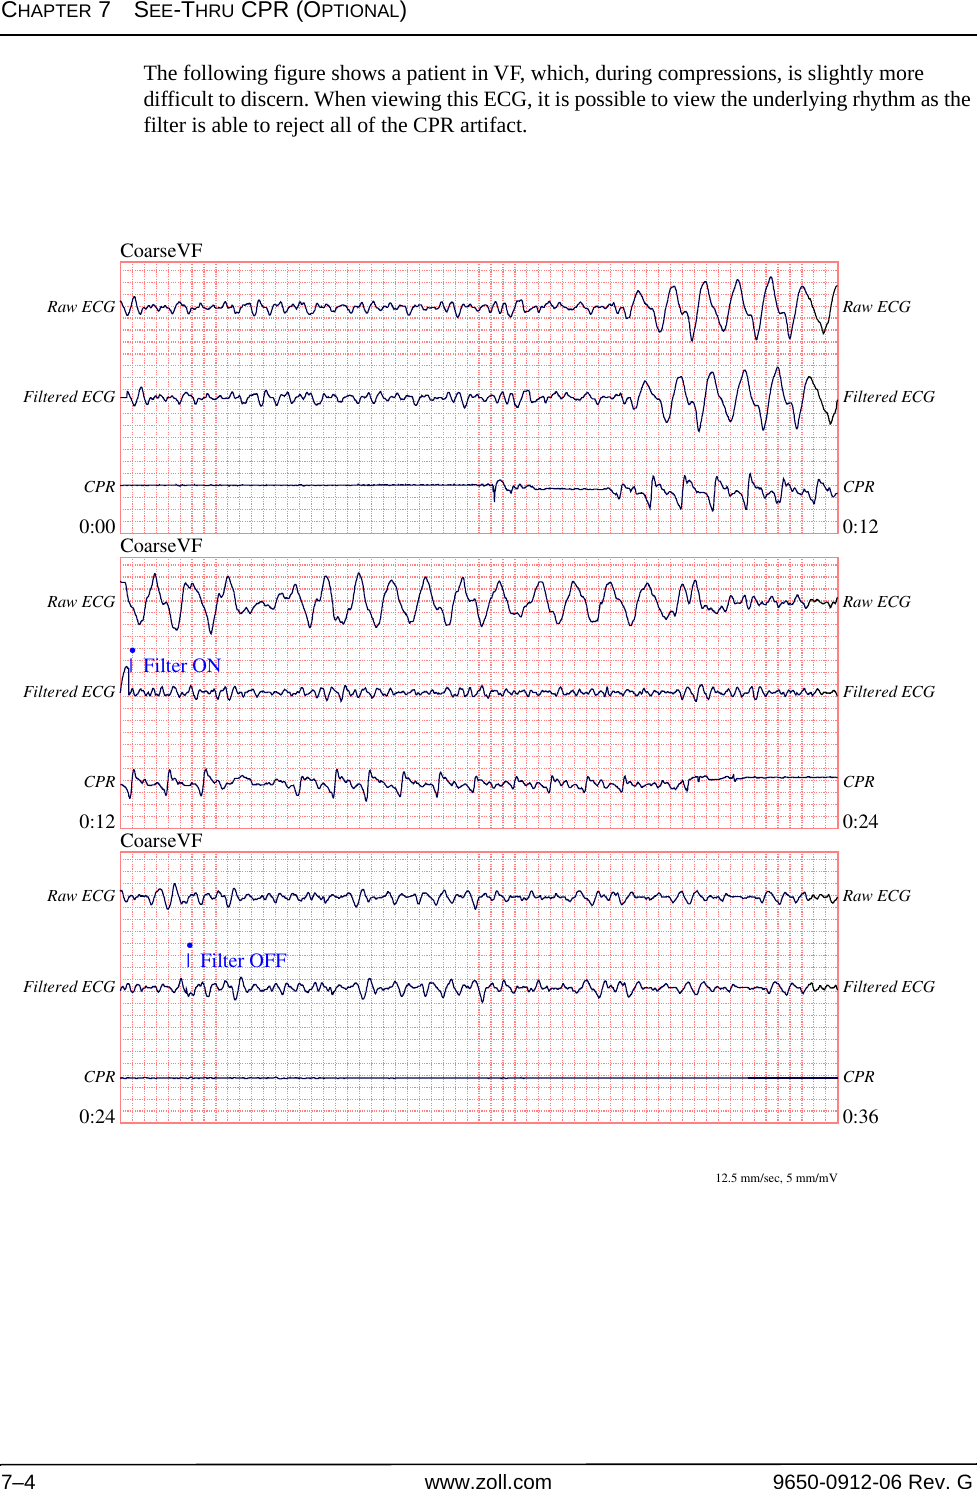 CHAPTER 7SEE-THRU CPR (OPTIONAL)7–4 www.zoll.com 9650-0912-06 Rev. GThe following figure shows a patient in VF, which, during compressions, is slightly more difficult to discern. When viewing this ECG, it is possible to view the underlying rhythm as the filter is able to reject all of the CPR artifact.CoarseVF0:00 0:12Raw ECG Raw ECGFiltered ECG Filtered ECGCPR CPRCoarseVF0:12 0:24Raw ECG Raw ECGFiltered ECG Filtered ECGCPR CPR|  Filter ON•CoarseVF0:24 0:36Raw ECG Raw ECGFiltered ECG Filtered ECGCPR CPR|  Filter OFF•12.5 mm/sec, 5 mm/mV